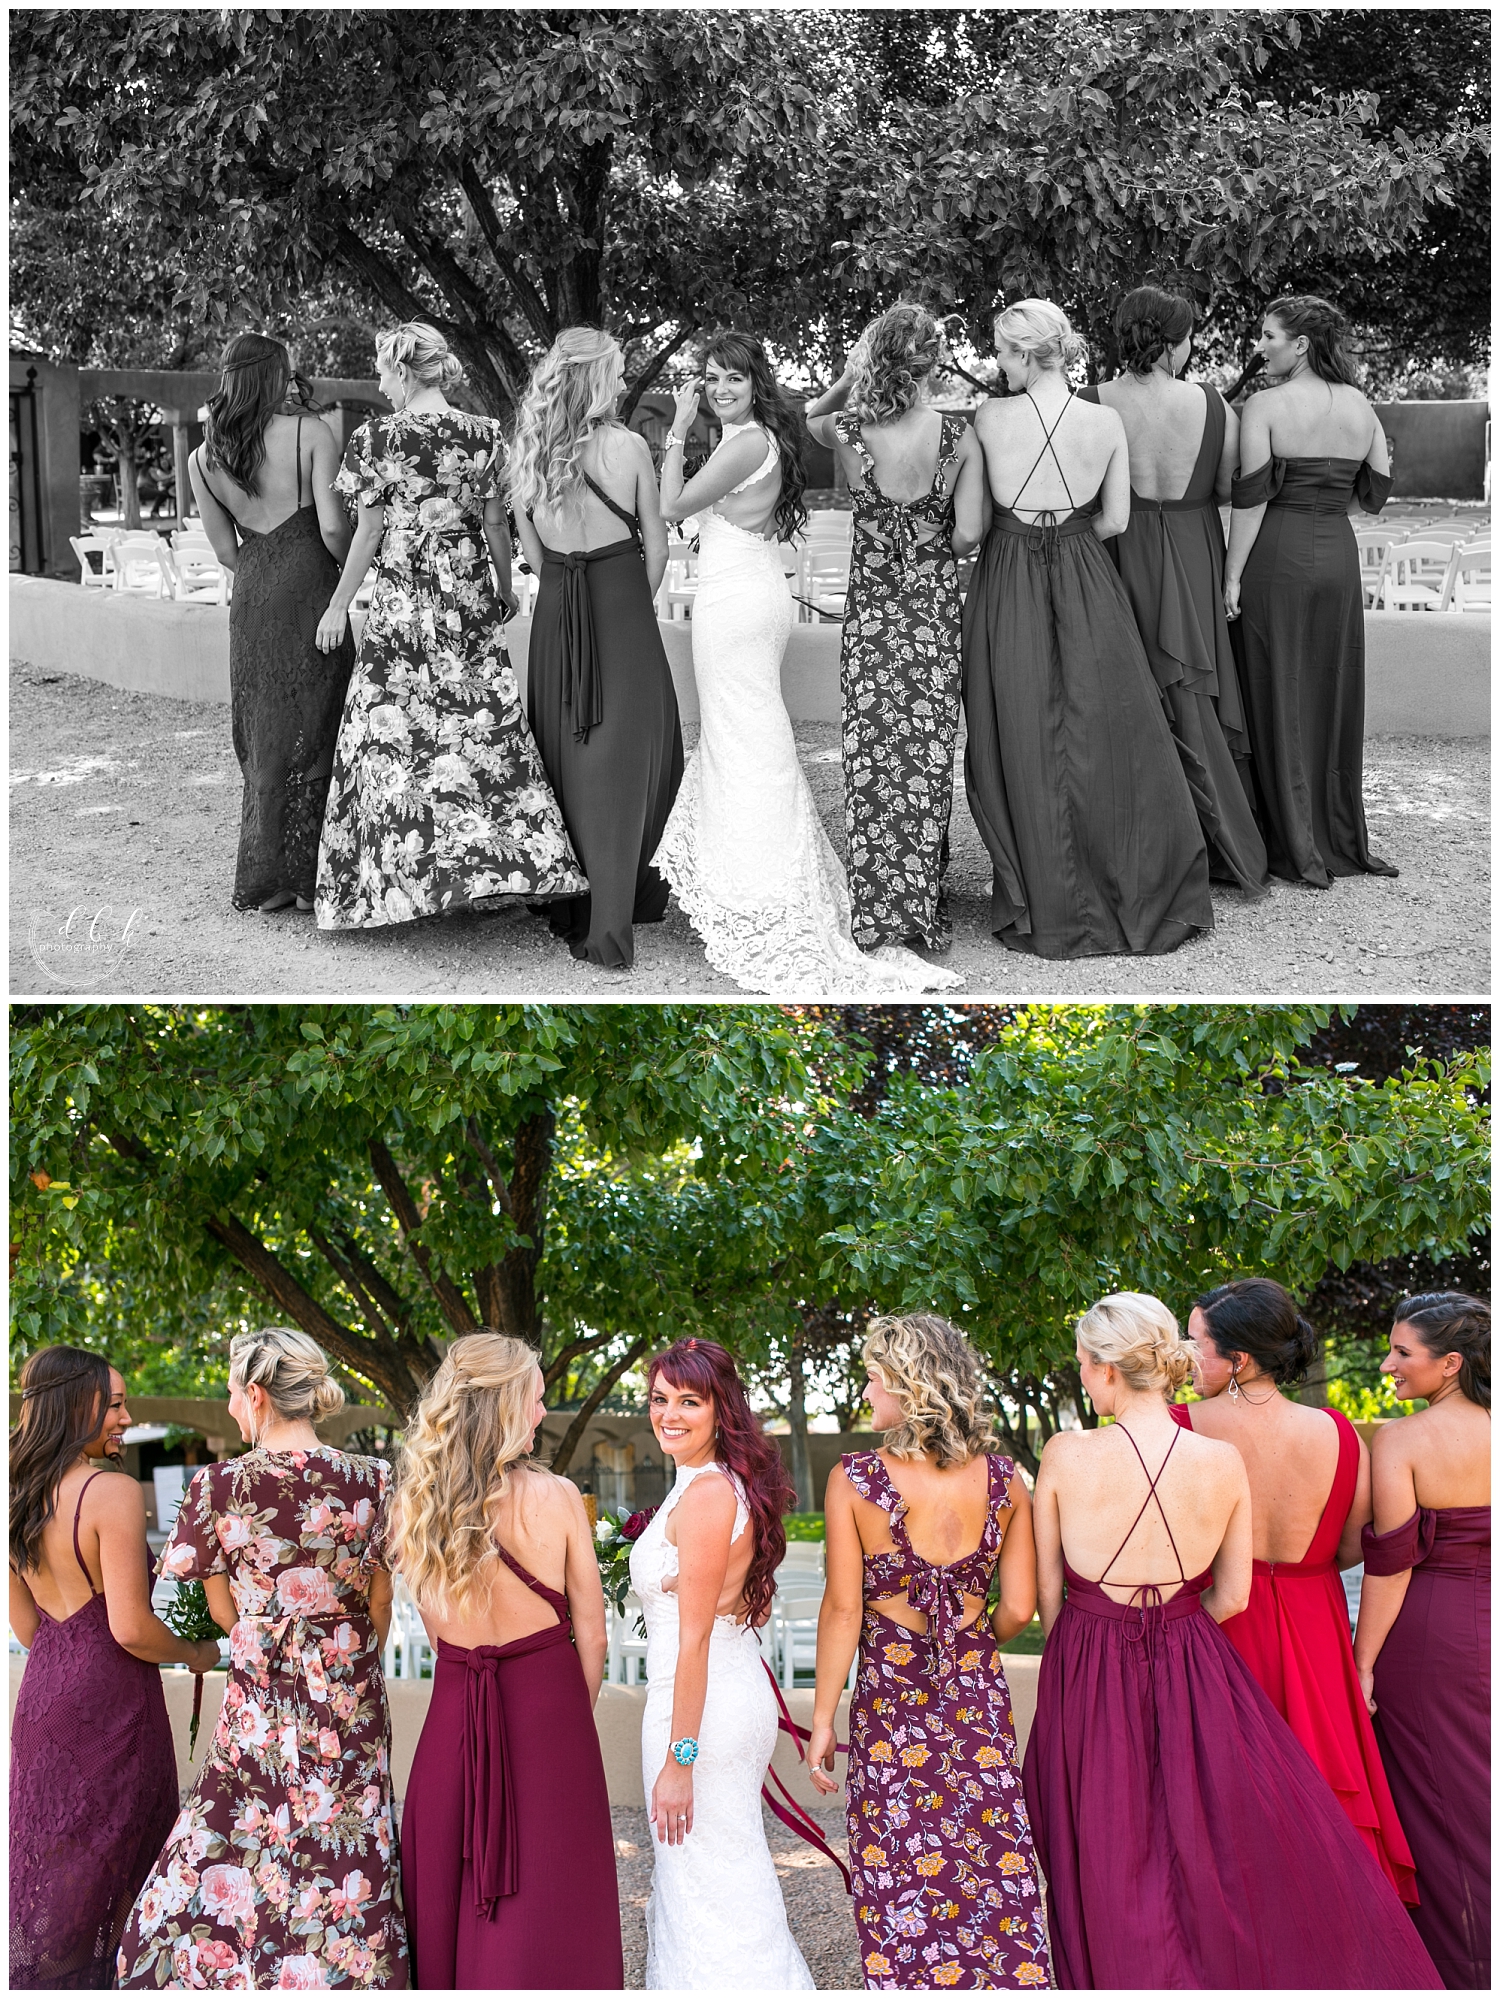 mismatched bridesmaid dresses at winery wedding in Albuquerque, New Mexico